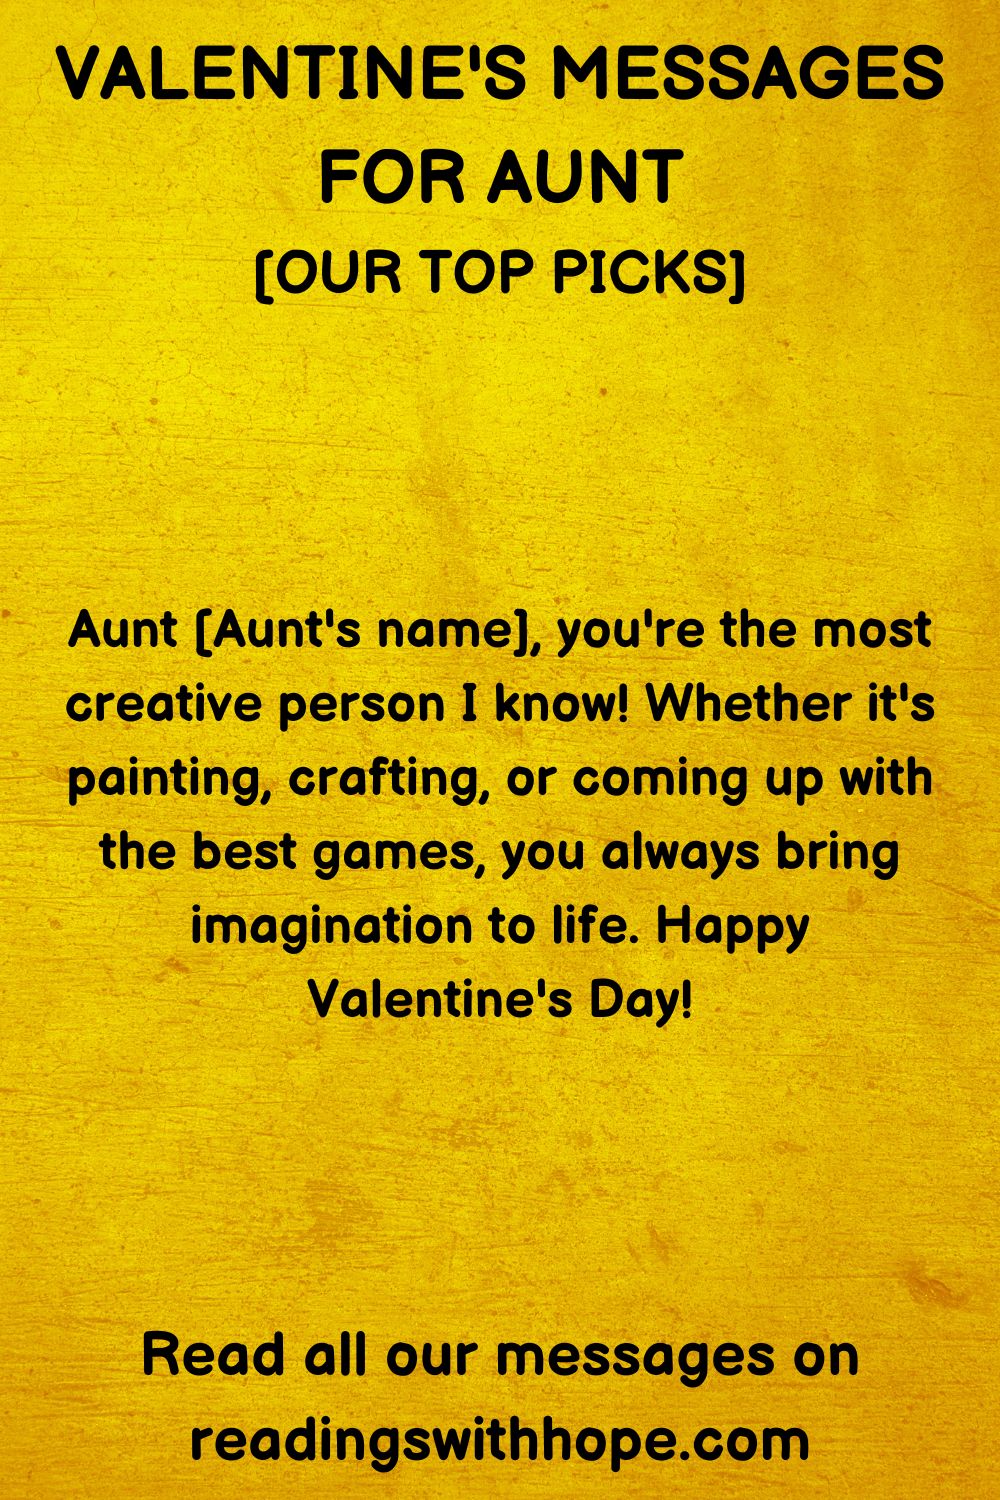 40 Valentine's Messages for Aunt